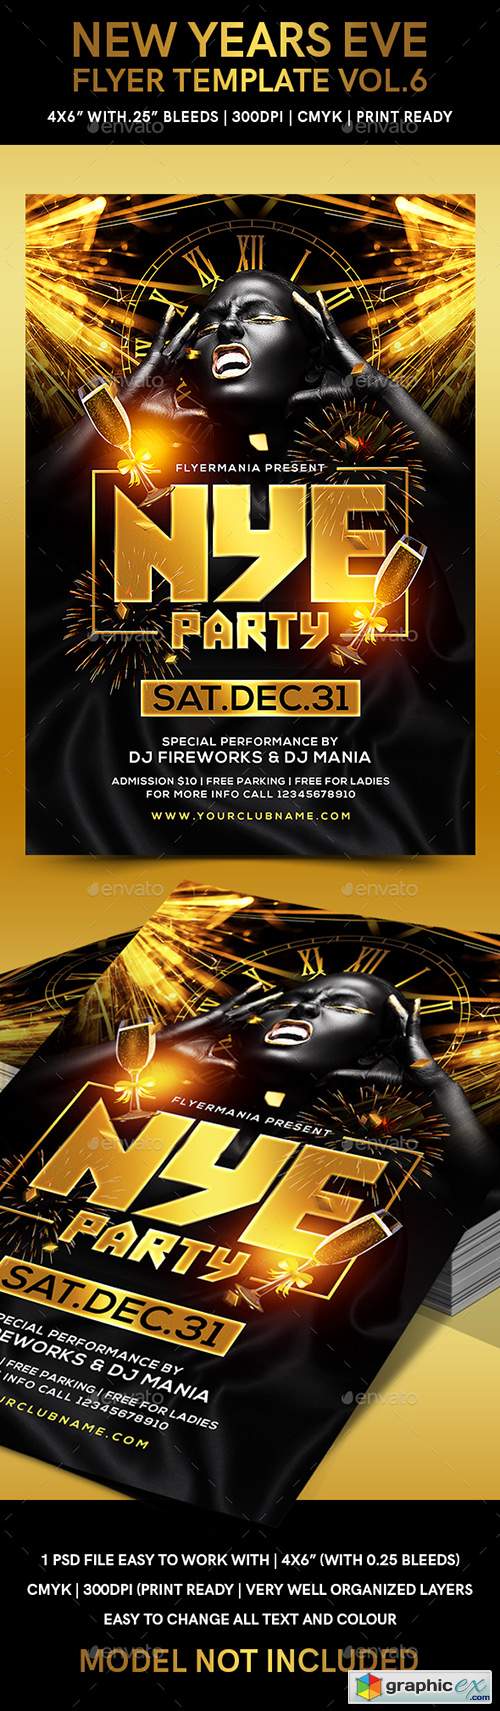 New Years Eve Flyer Template Vol6